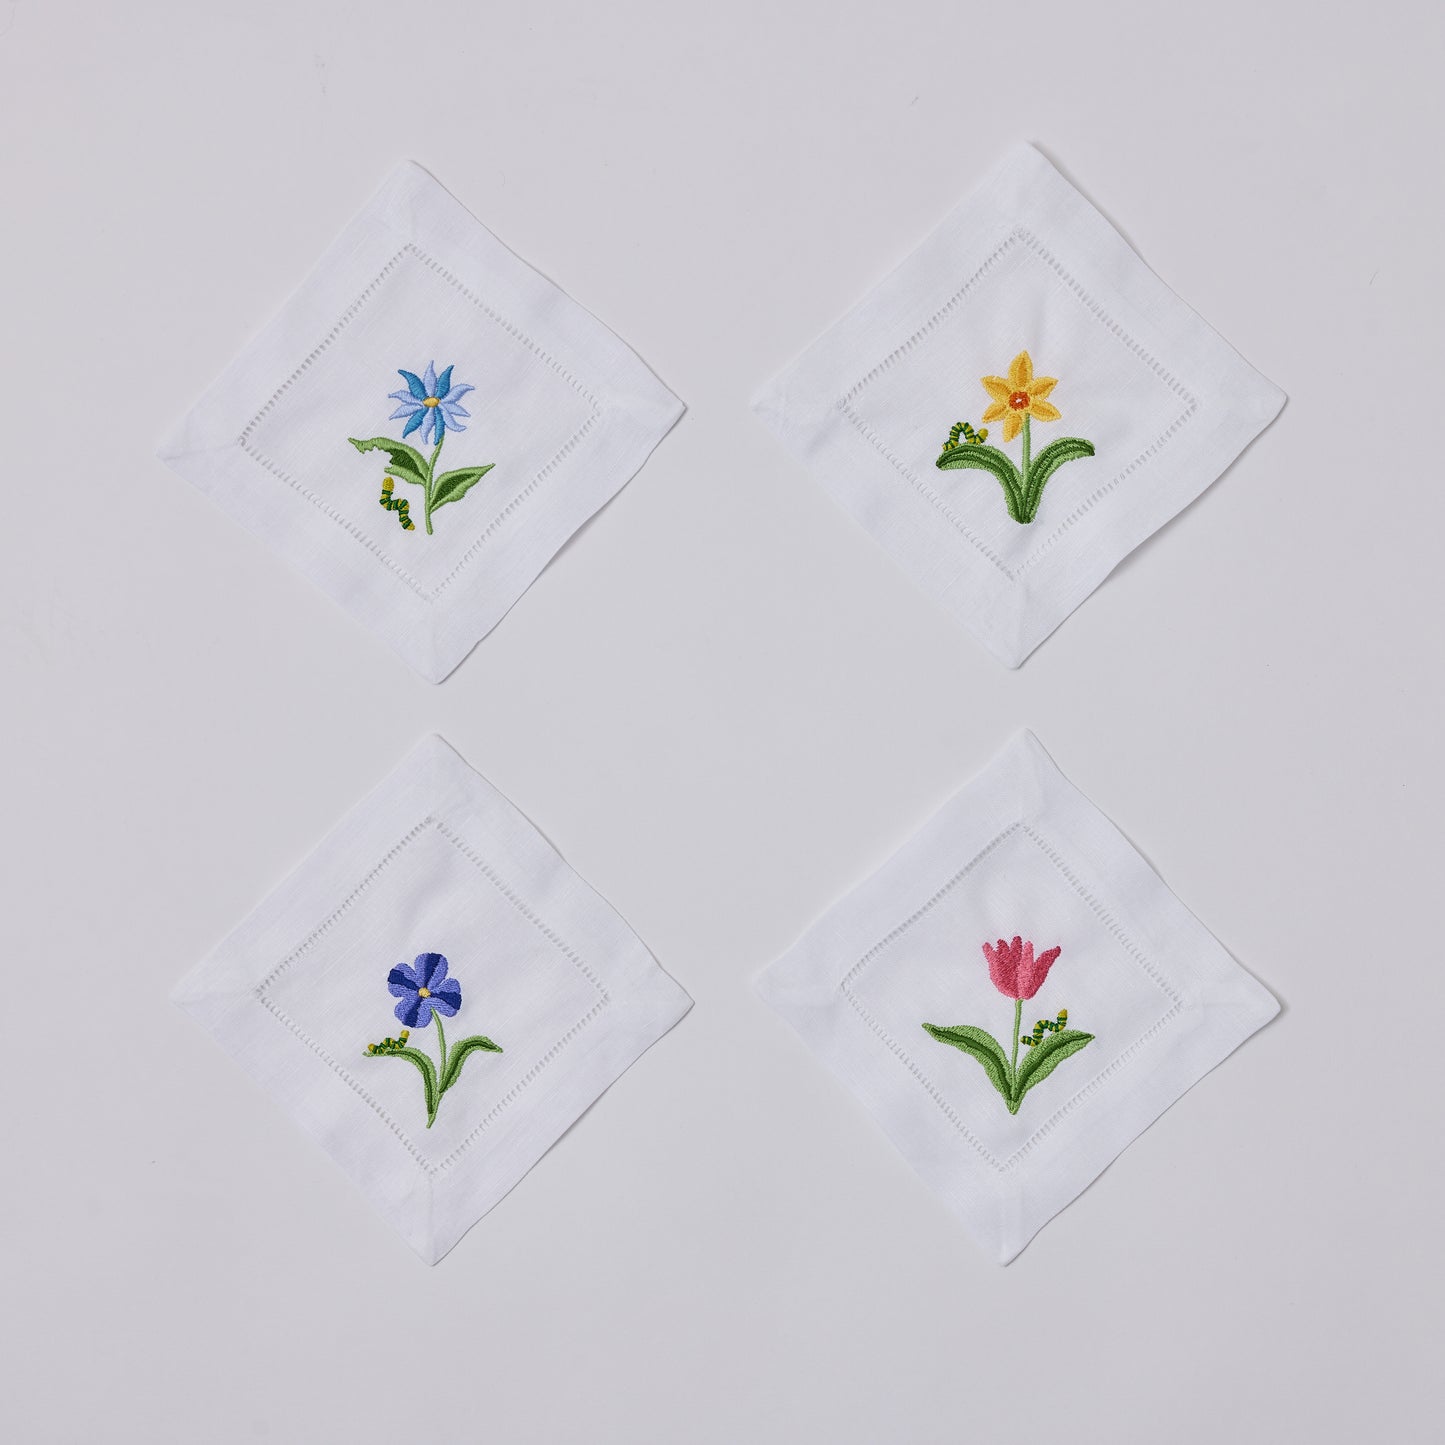 Assorted Flower & Inch Worm Cocktail Napkins, Set of 4